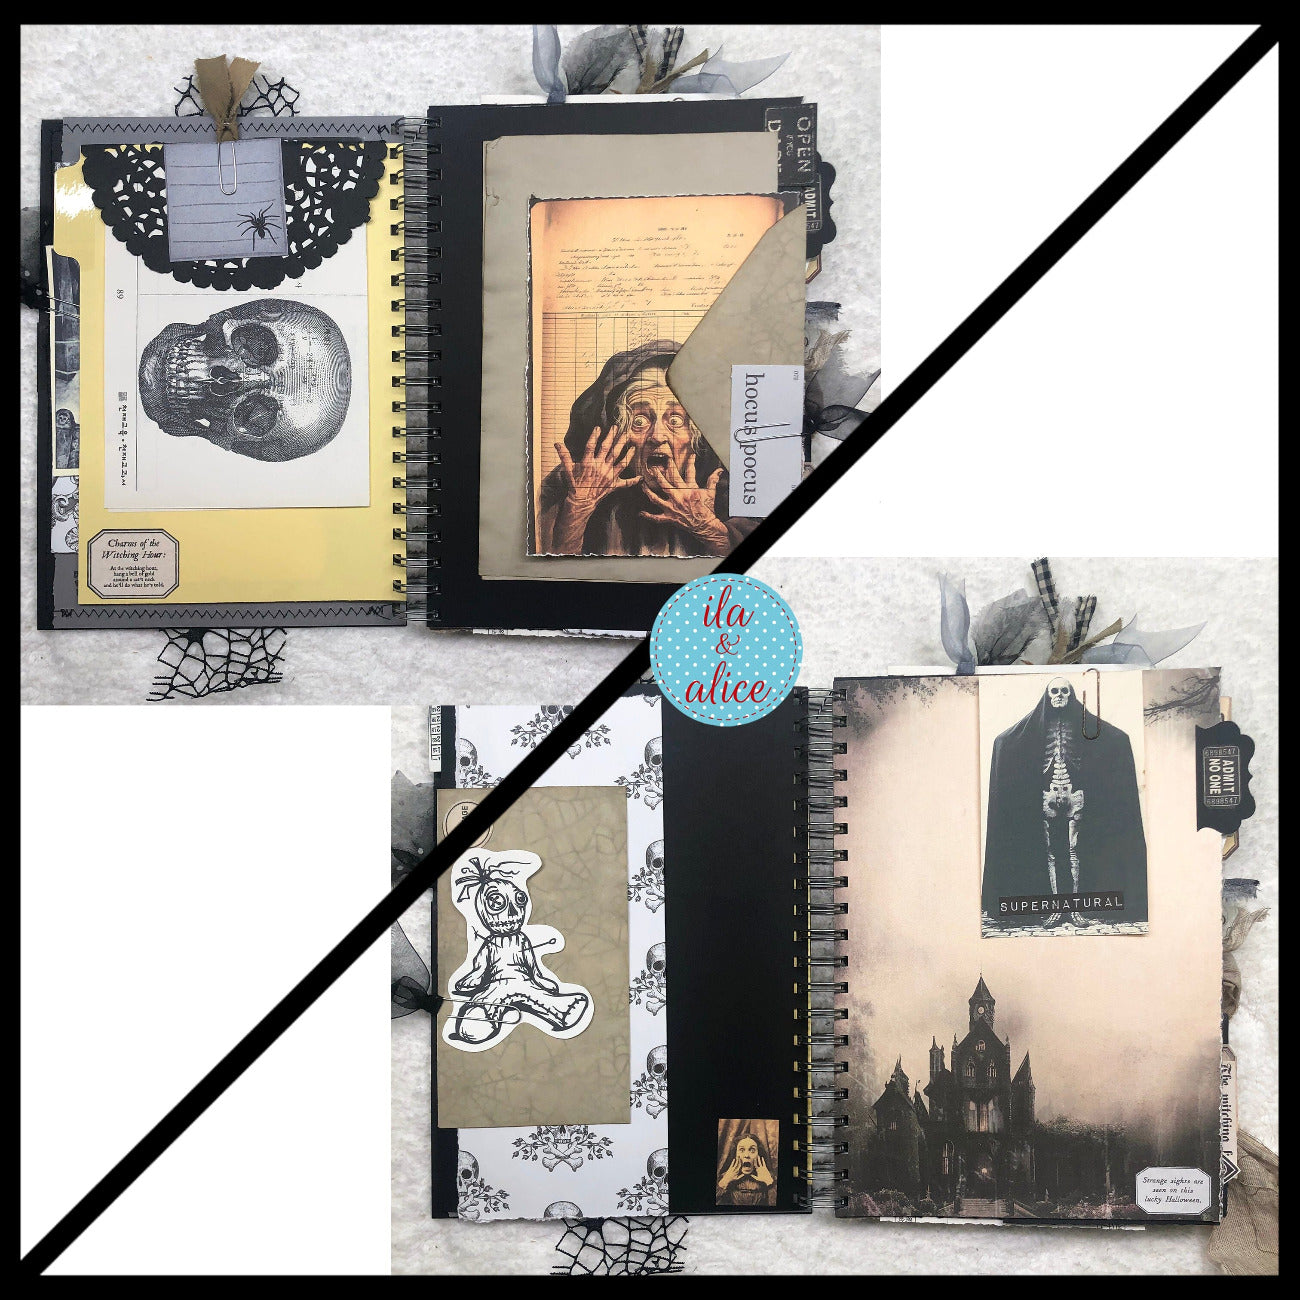 Creepy Witches Halloween Junk Journal with Ghosts & Ghouls Journal ila & alice 